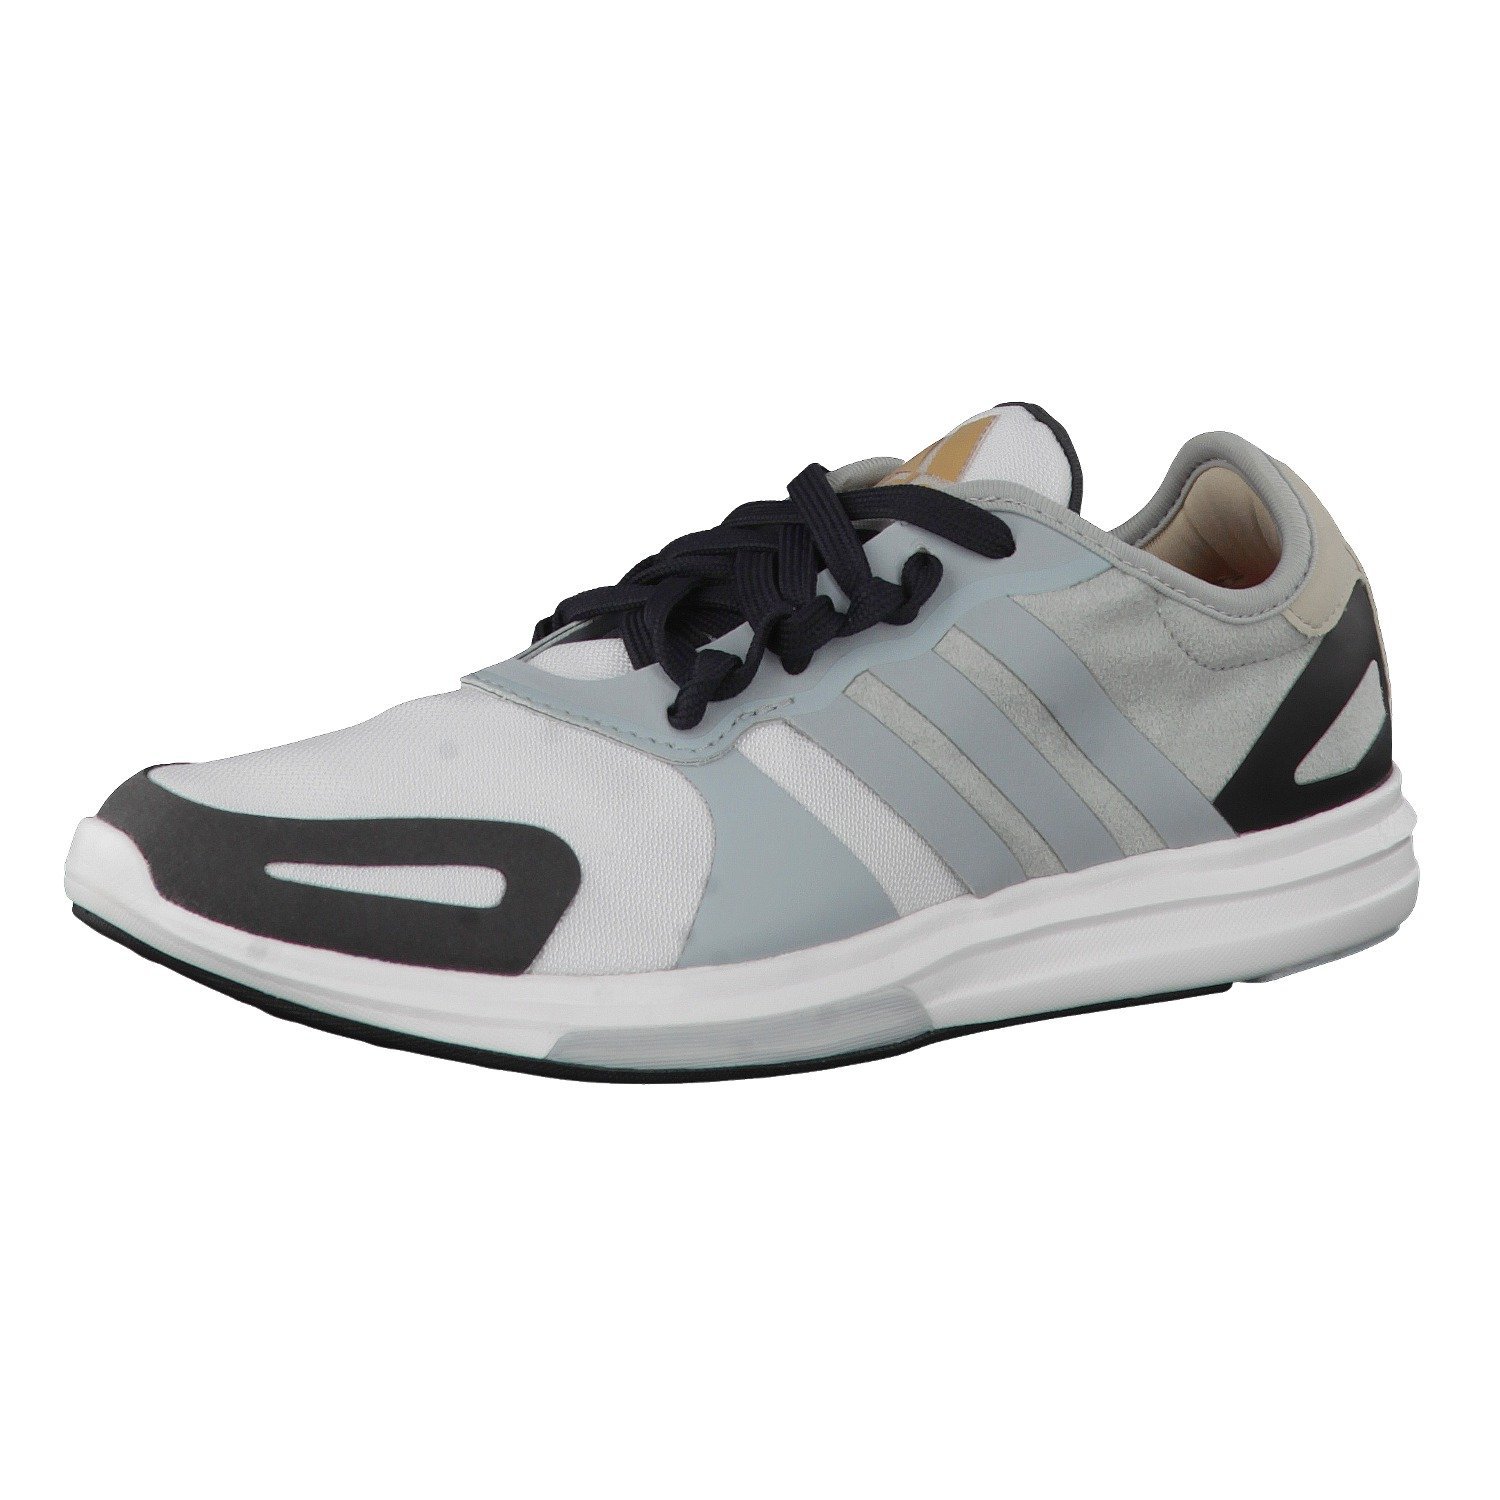 Amazon - Buy adidas Women's Yvori Mesh Multisport Training Shoes at Rs 1319  only - Dealnloot